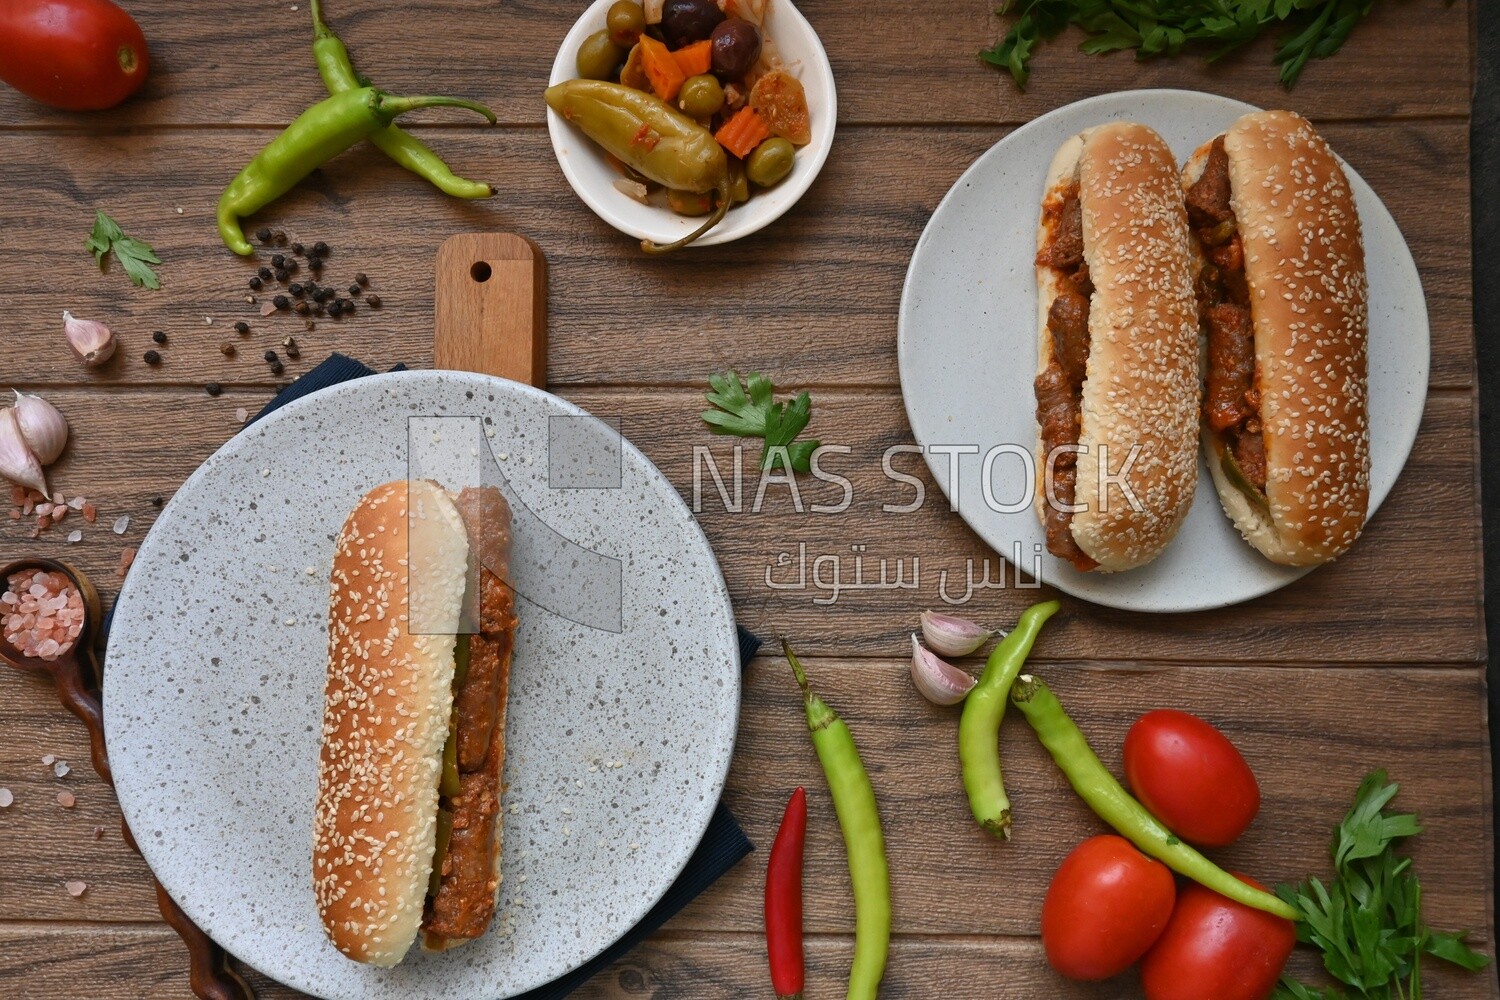 Top view of a delicious sausage sandwich, delicious fast food meals, Arabic restaurants, delicious food recipes, delicious food, sausage sandwich